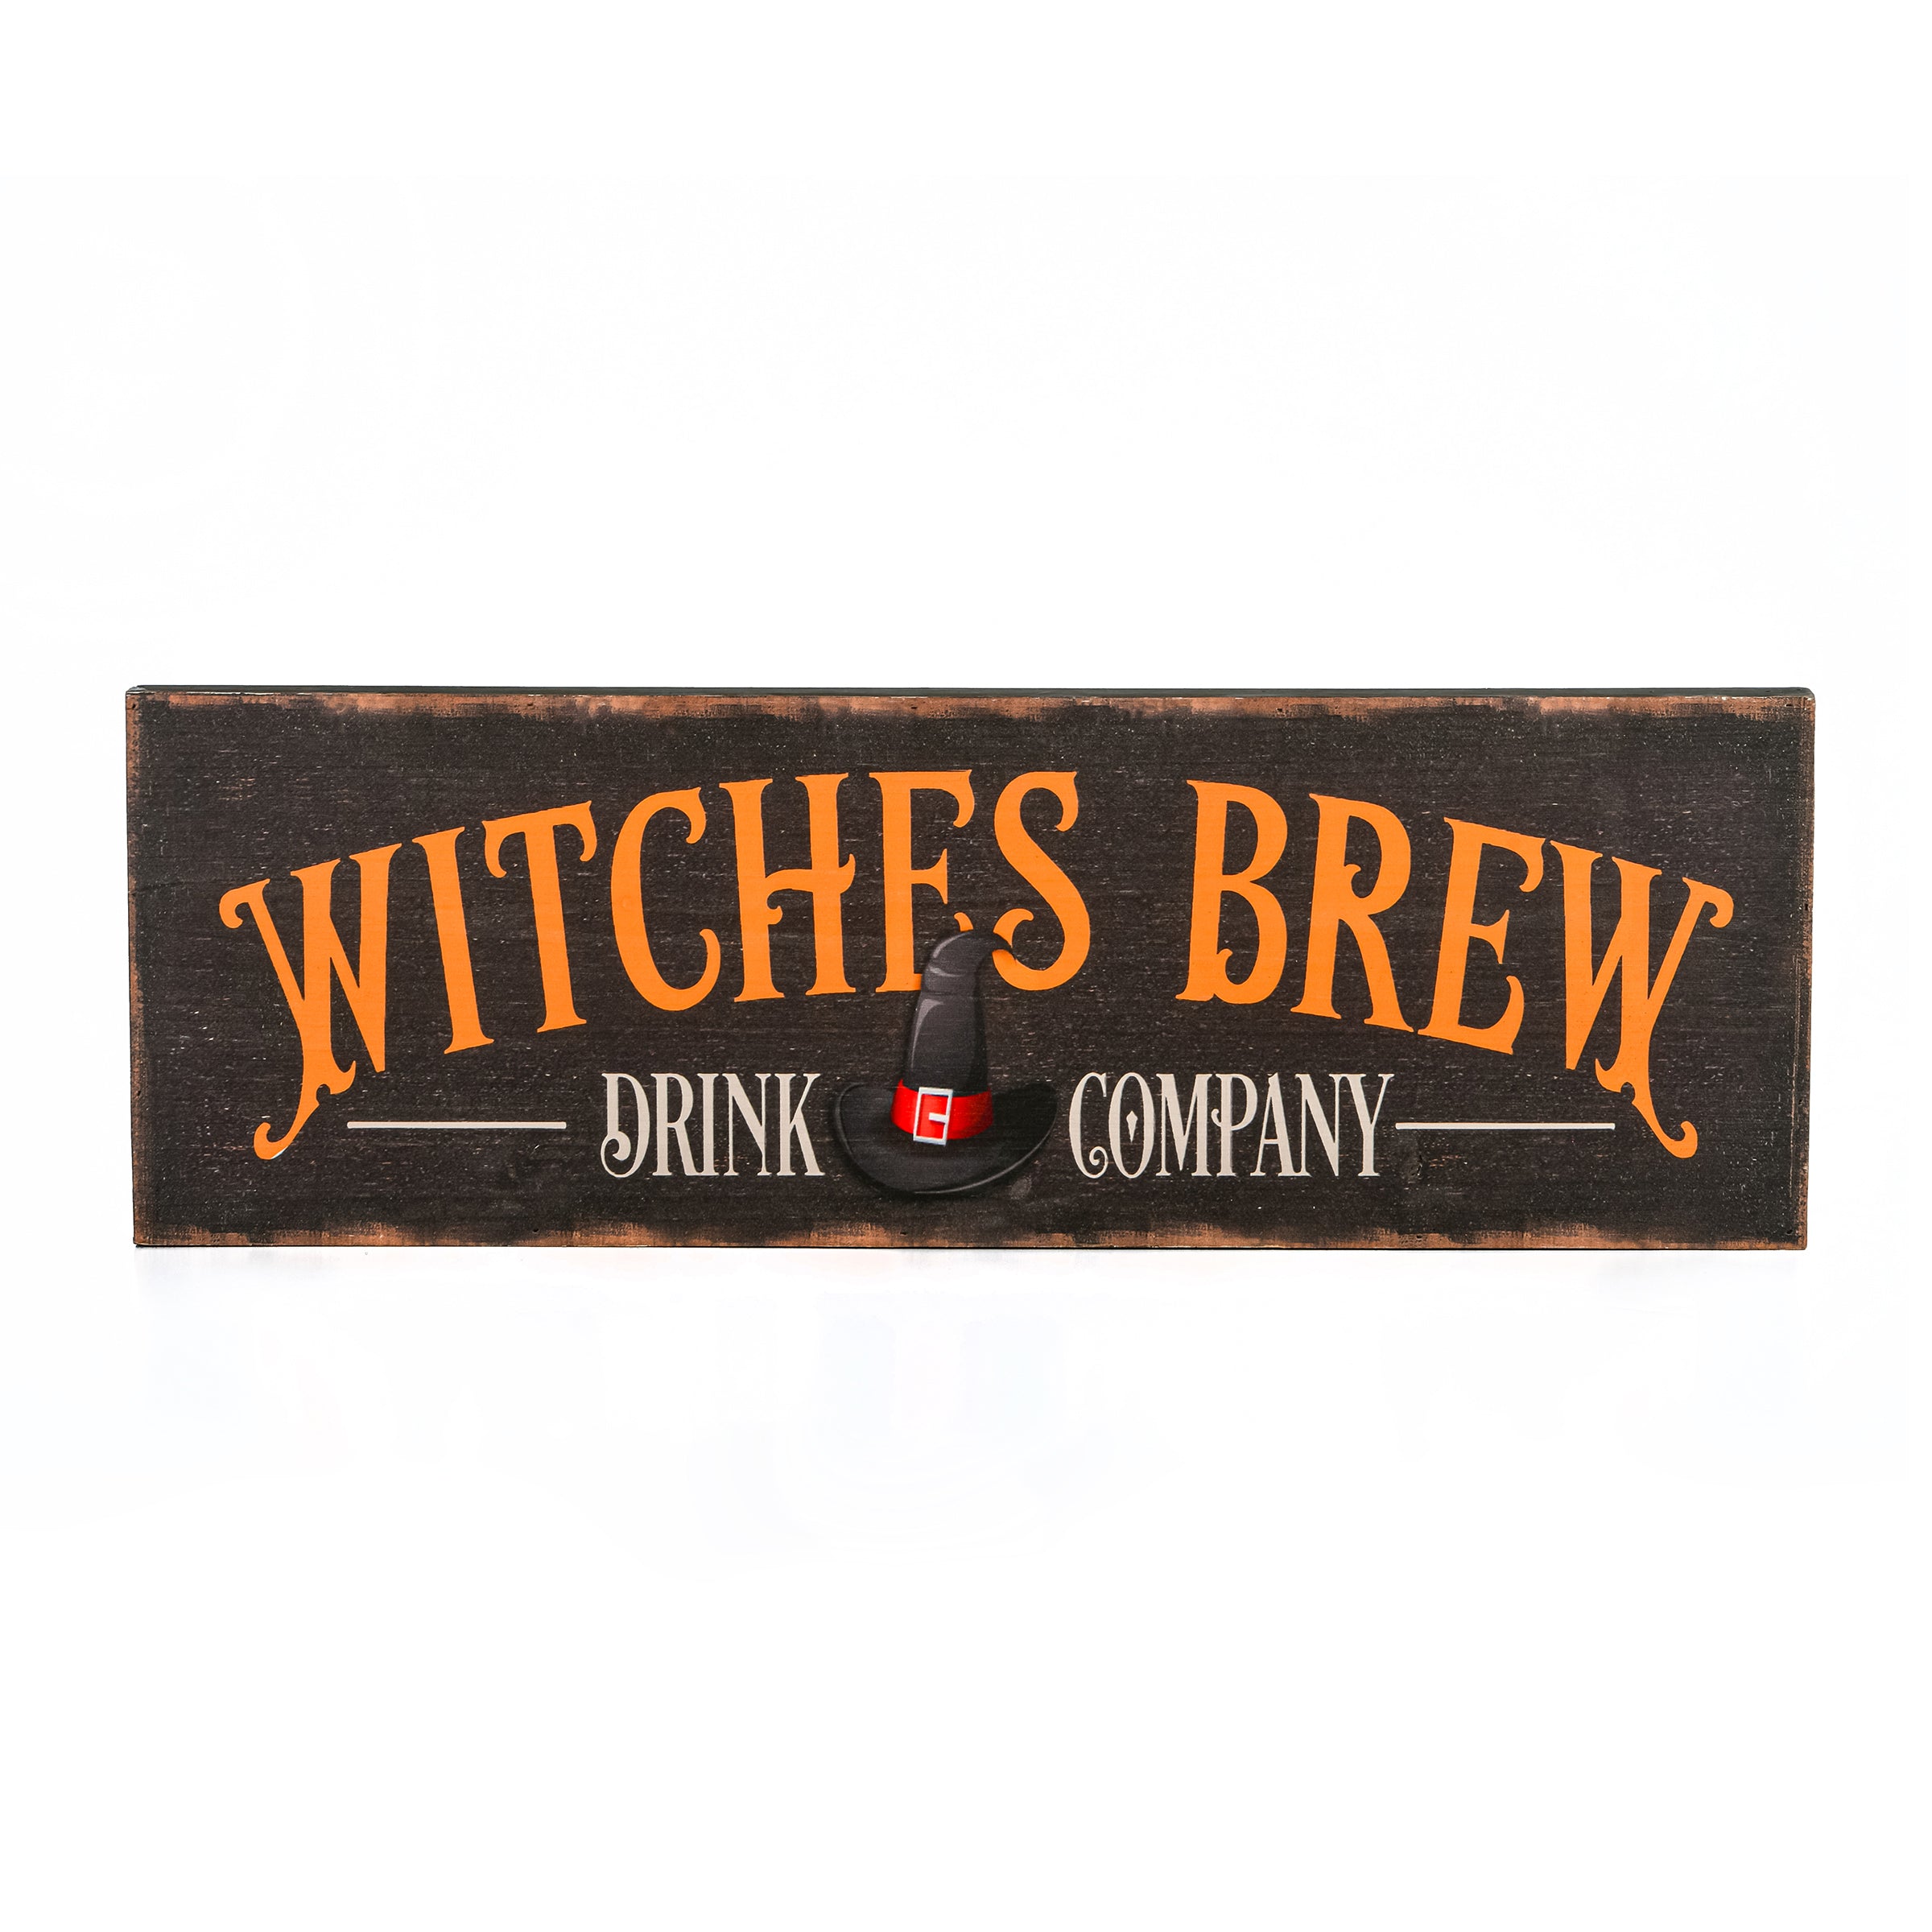 Halloween Hanging Wall Decoration, Black, 'Witches Brew Drink Company', Wooden Construction, 2 Feet